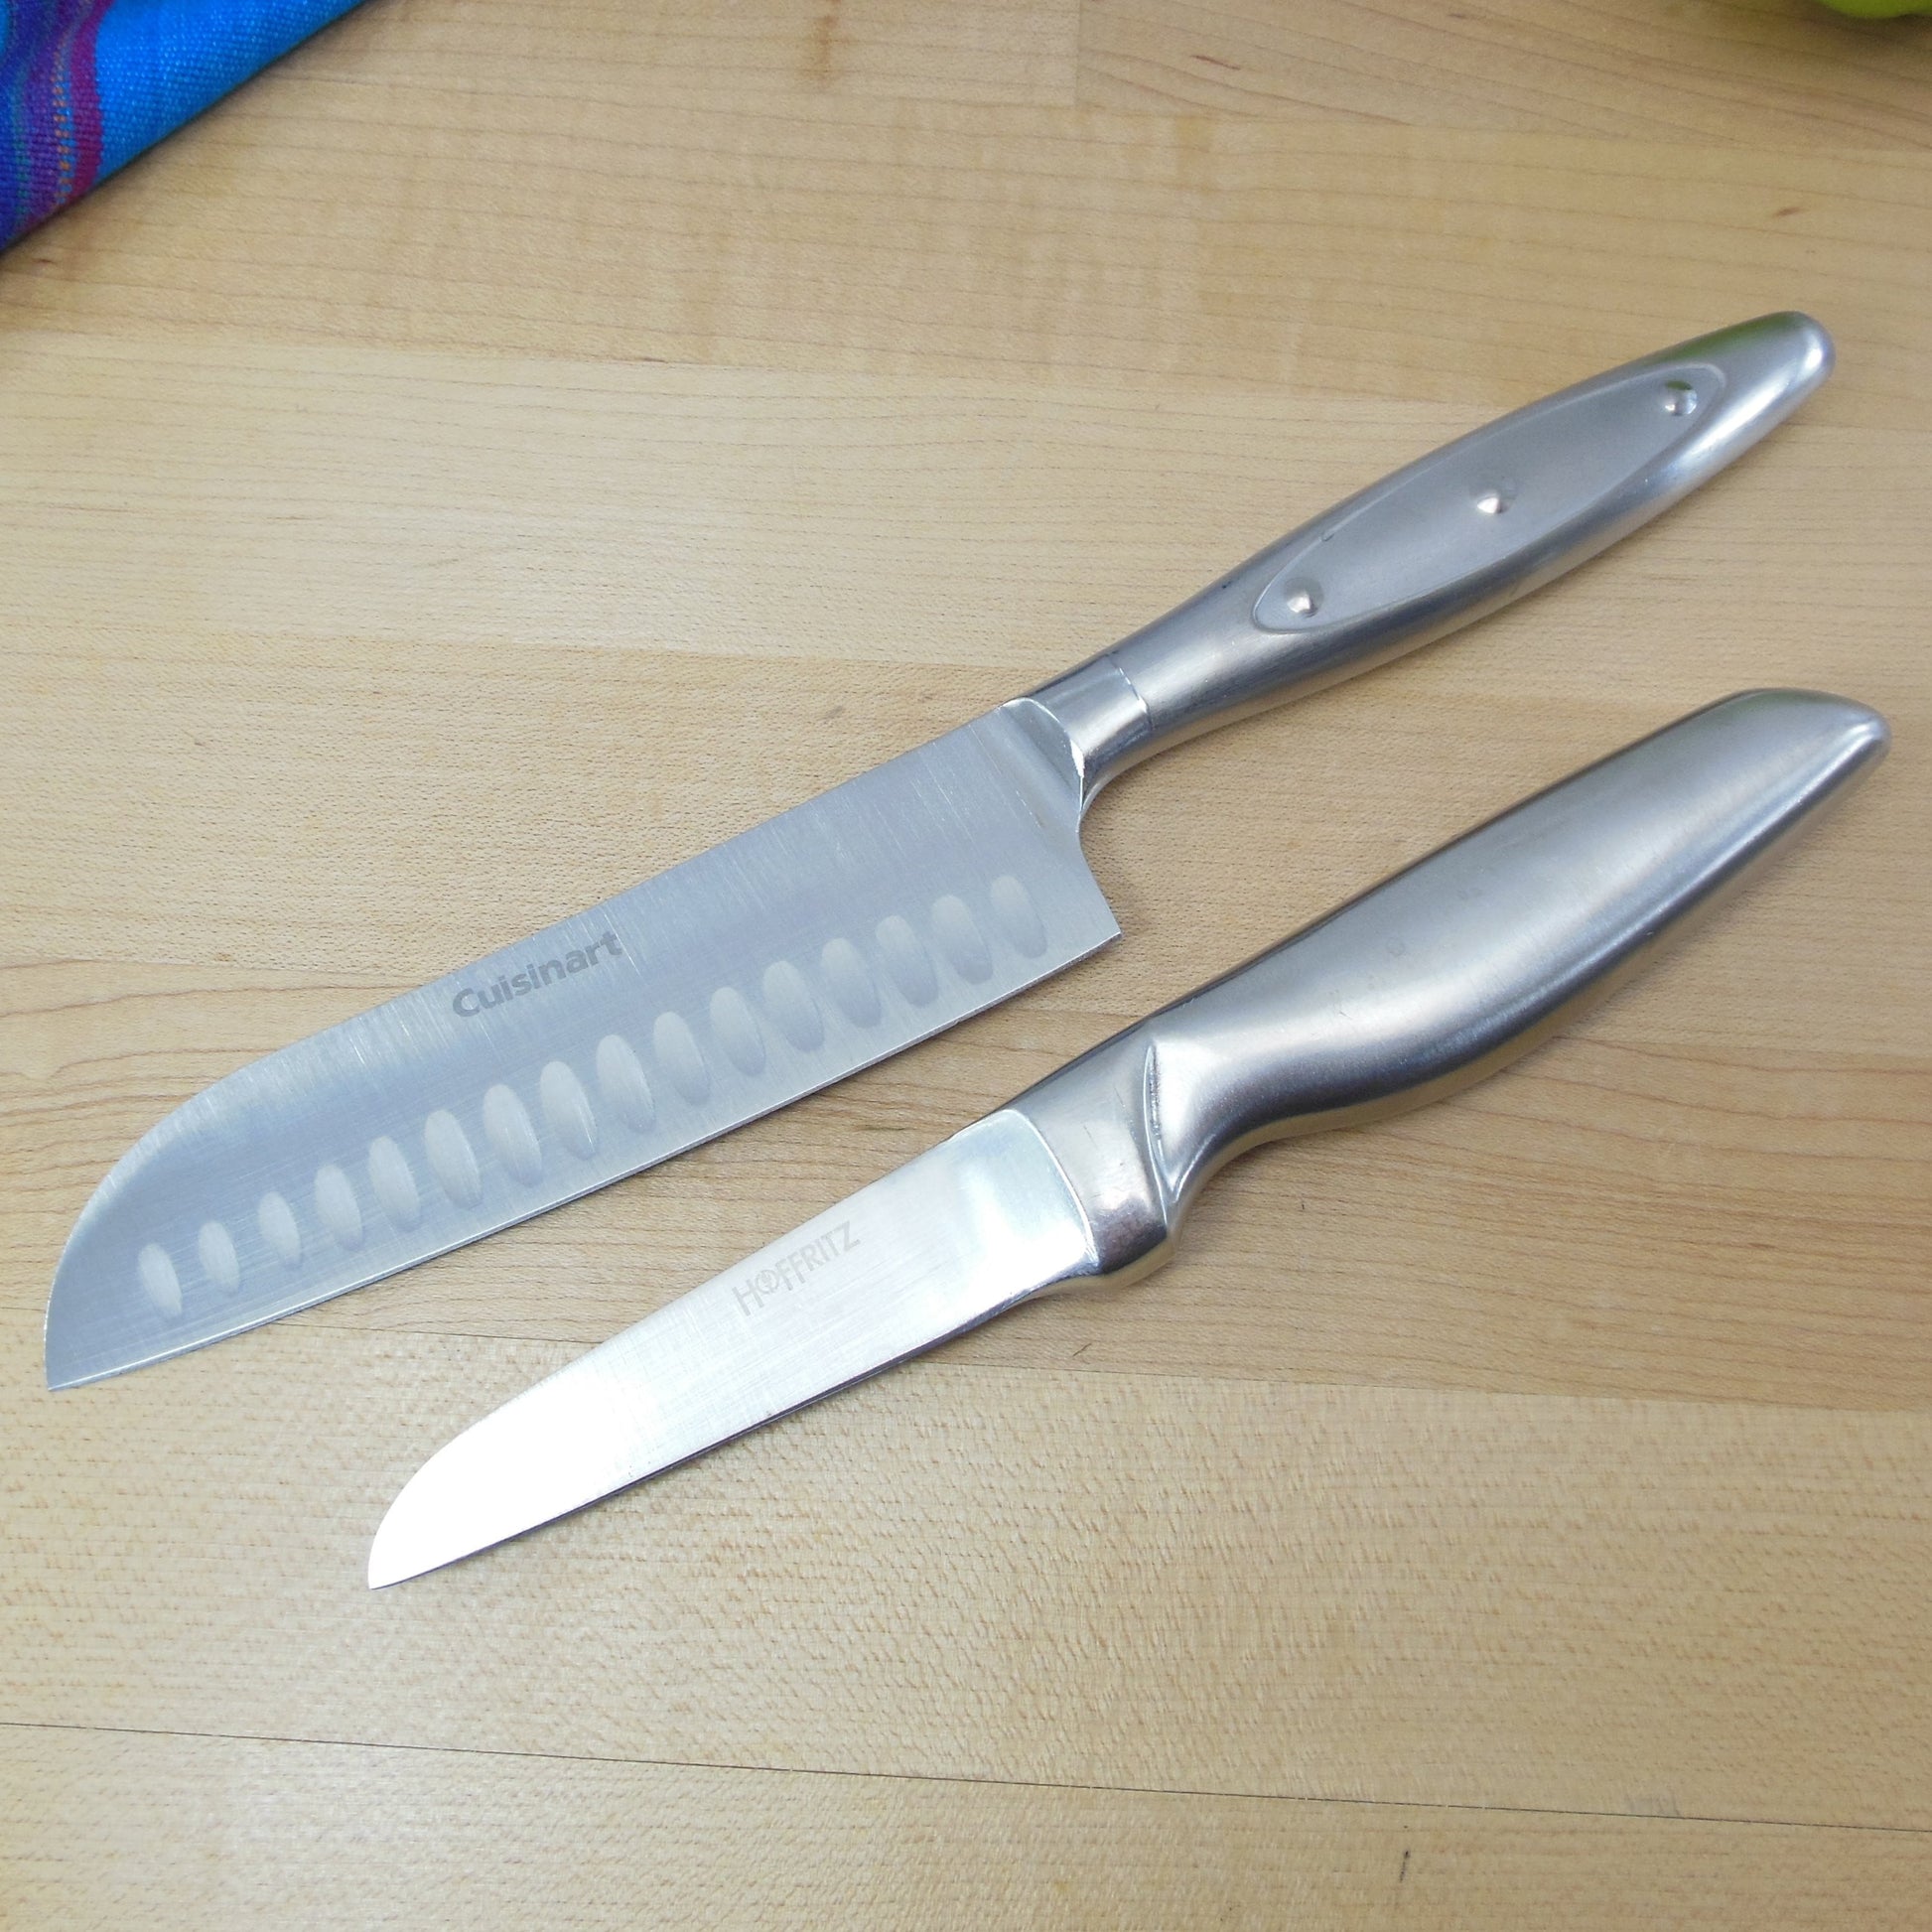 Cuisinart 5" Santoku or Hoffritz 3" Paring Knife Stainless Handles - Your Choice